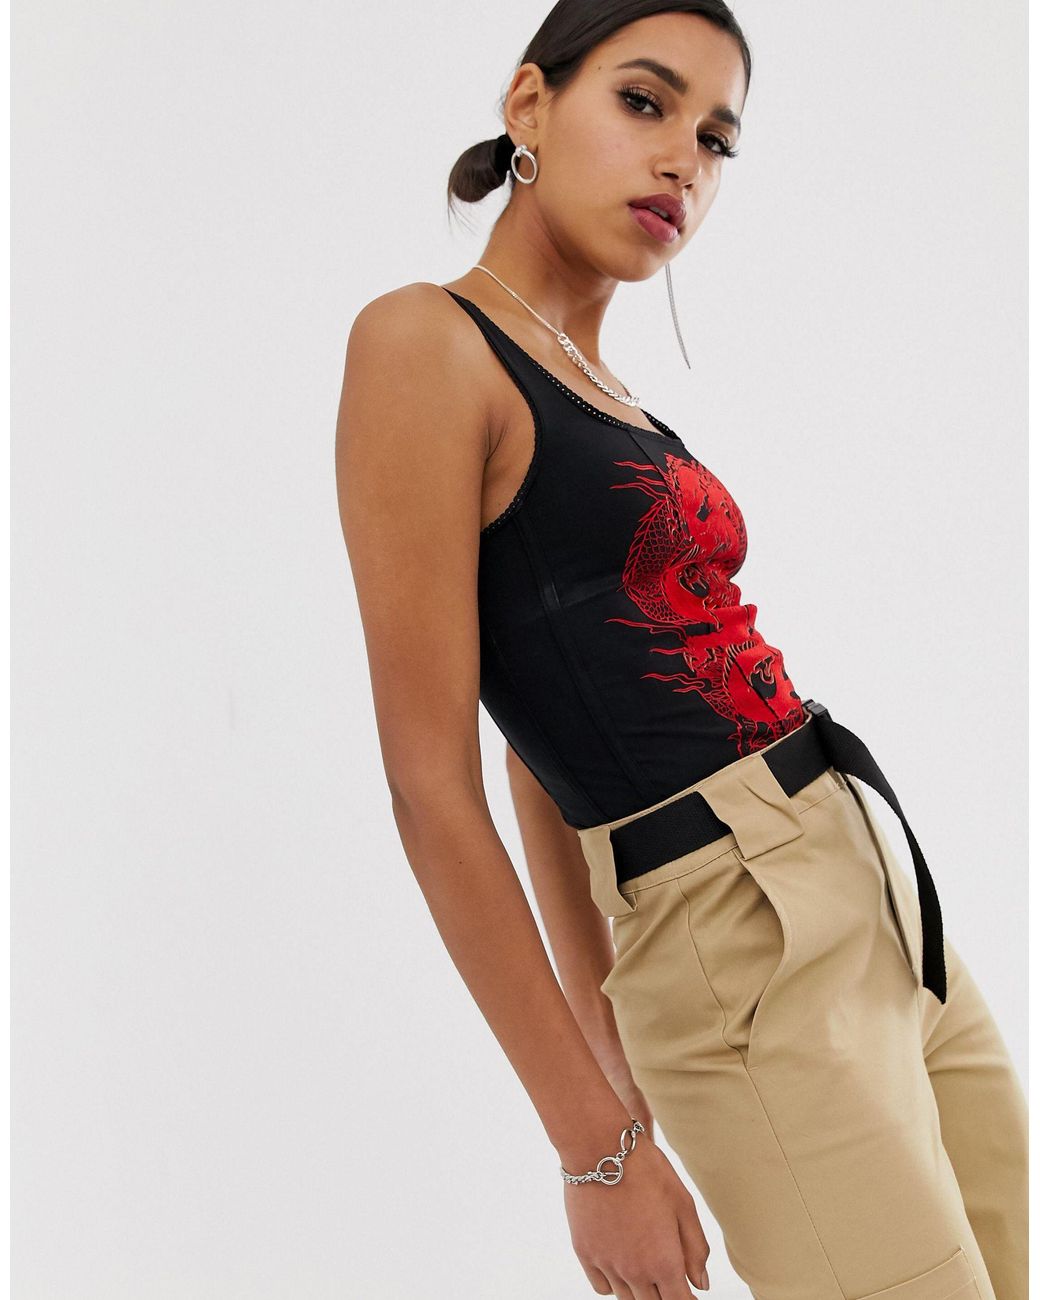 https://cdna.lystit.com/1040/1300/n/photos/asos/4bf7db96/jaded-london-Black-Structured-Corset-Top-With-Lace-Up-Back-And-Flocked-Dragon-Print.jpeg